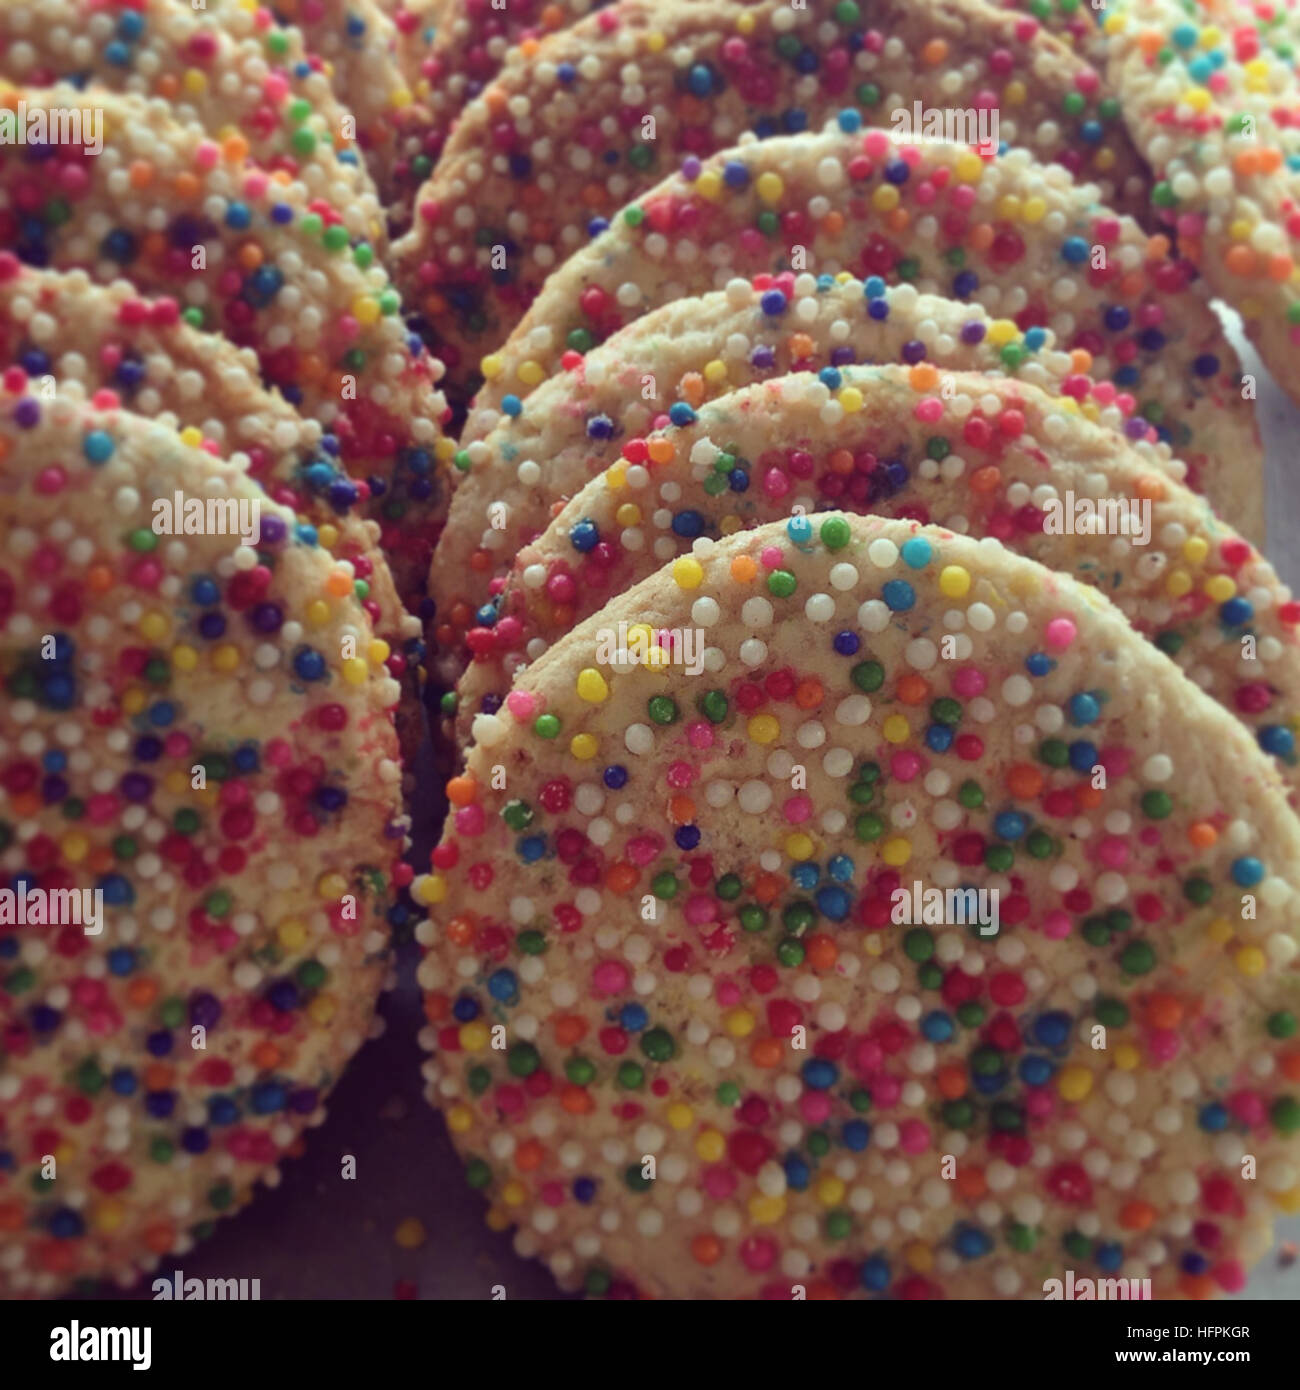 Mexican sweet biscuits Pan dulce con chochitos de colores Mexican Shortbread Cookies w/ Rainbow Sprinkles Stock Photo